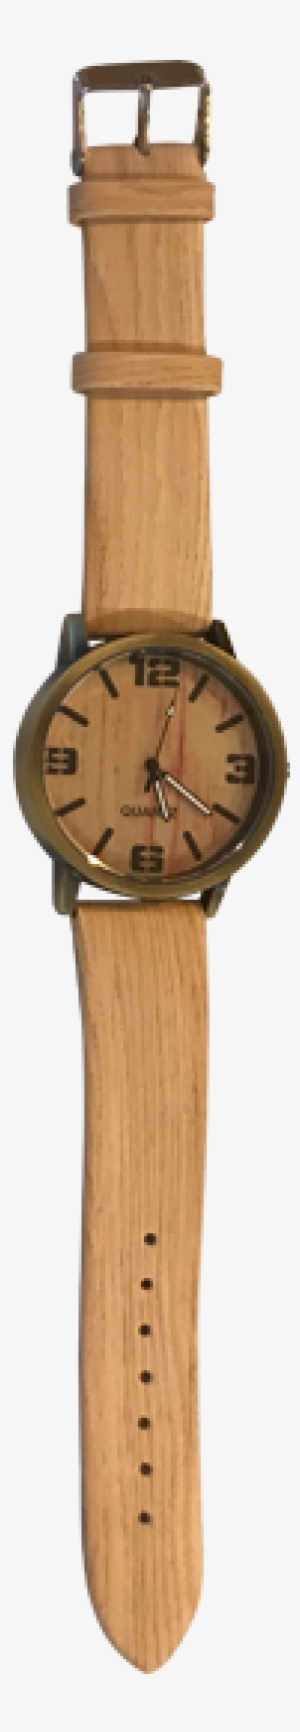 Old English Watch - Watch